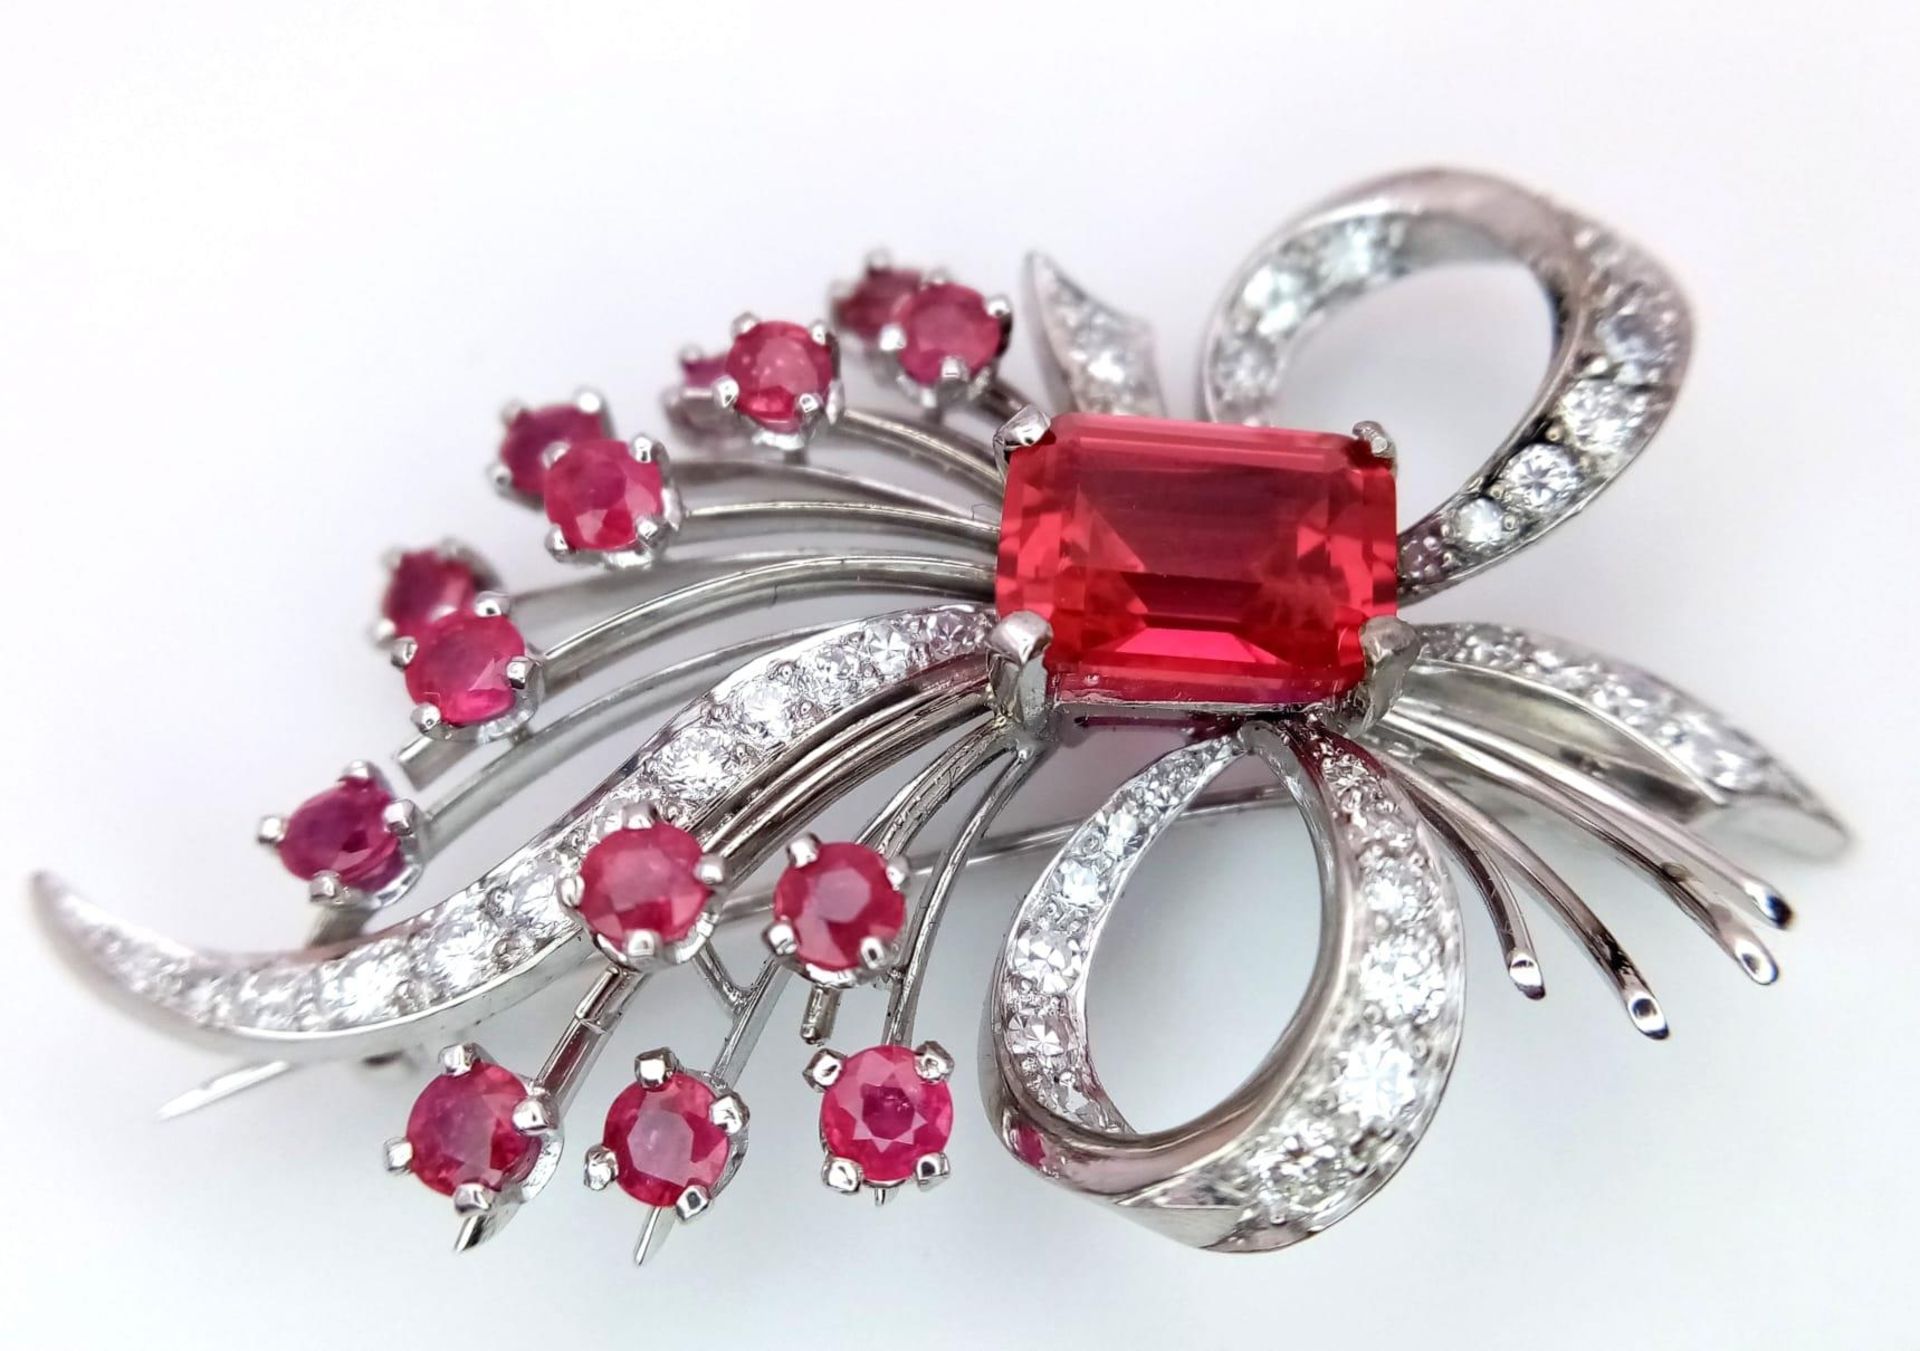 A STUNNING DIAMOND AND RUBY BROOCH SET IN PLATINUM , A MAJESTIC SPRAY OF RUBIES EMINATING FROM A